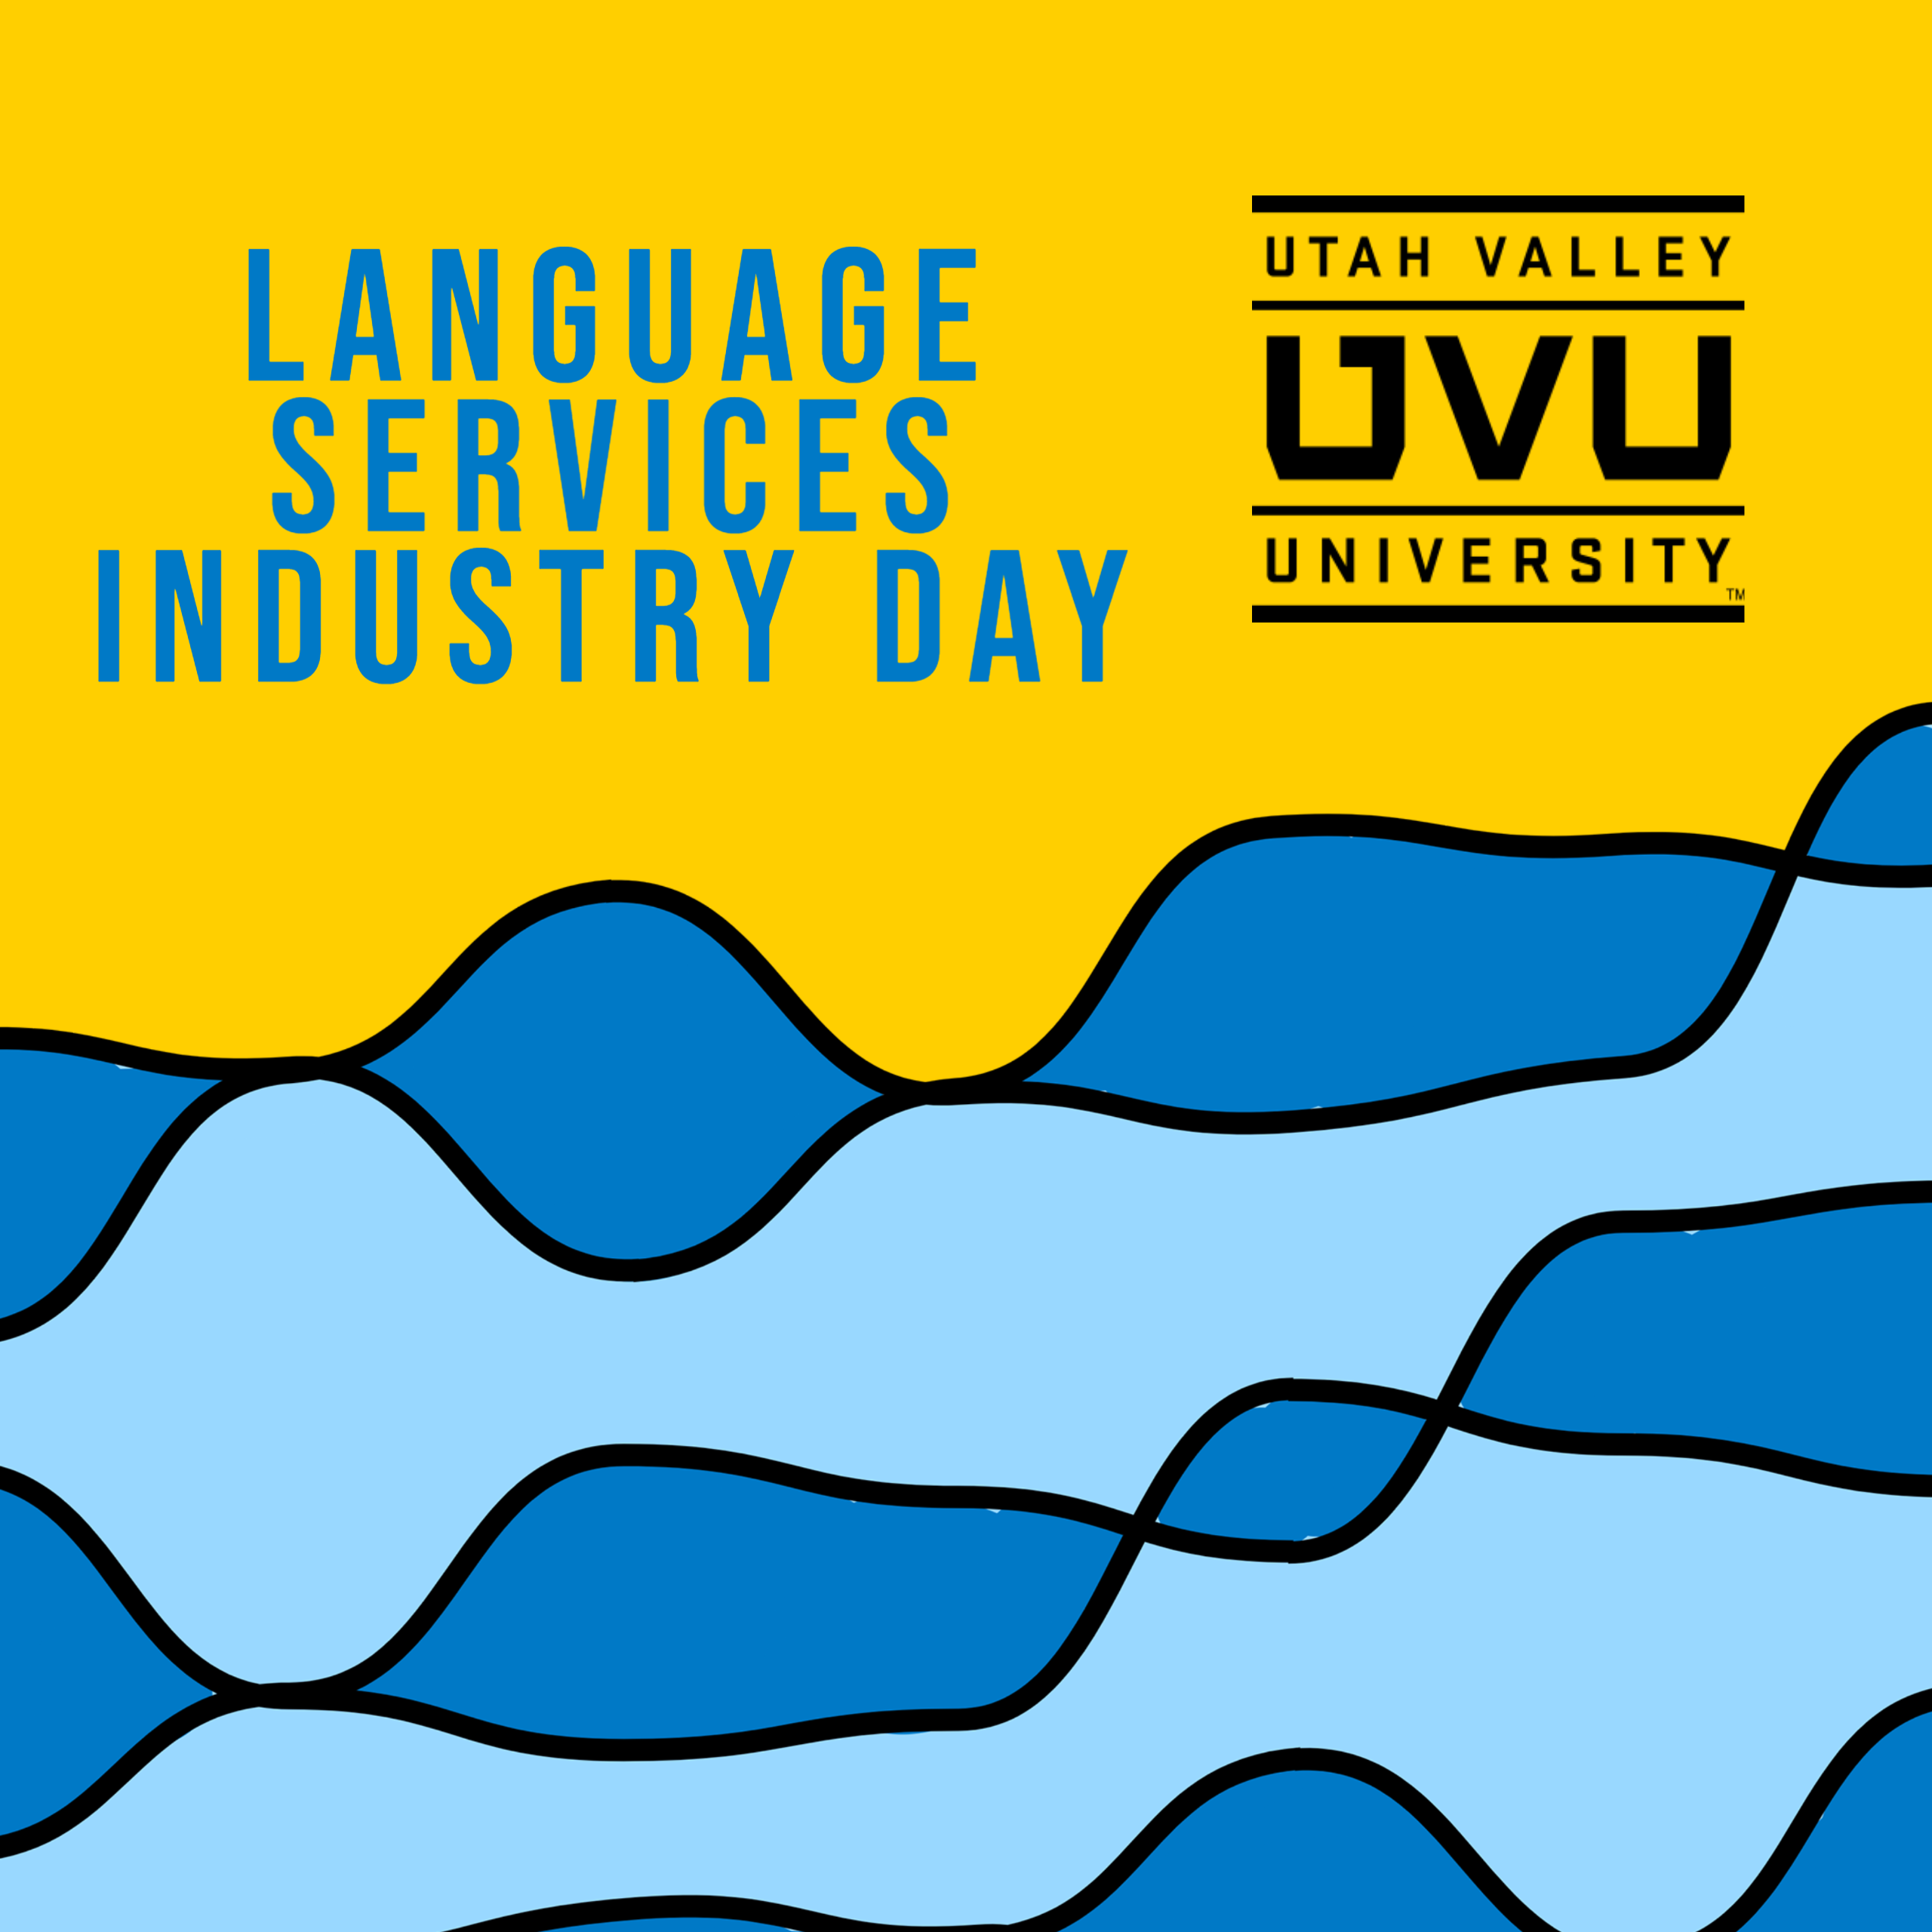 Yellow background with groovy blue designs. Says "Language Services Industry Day" and has Utah Valley University's square logo